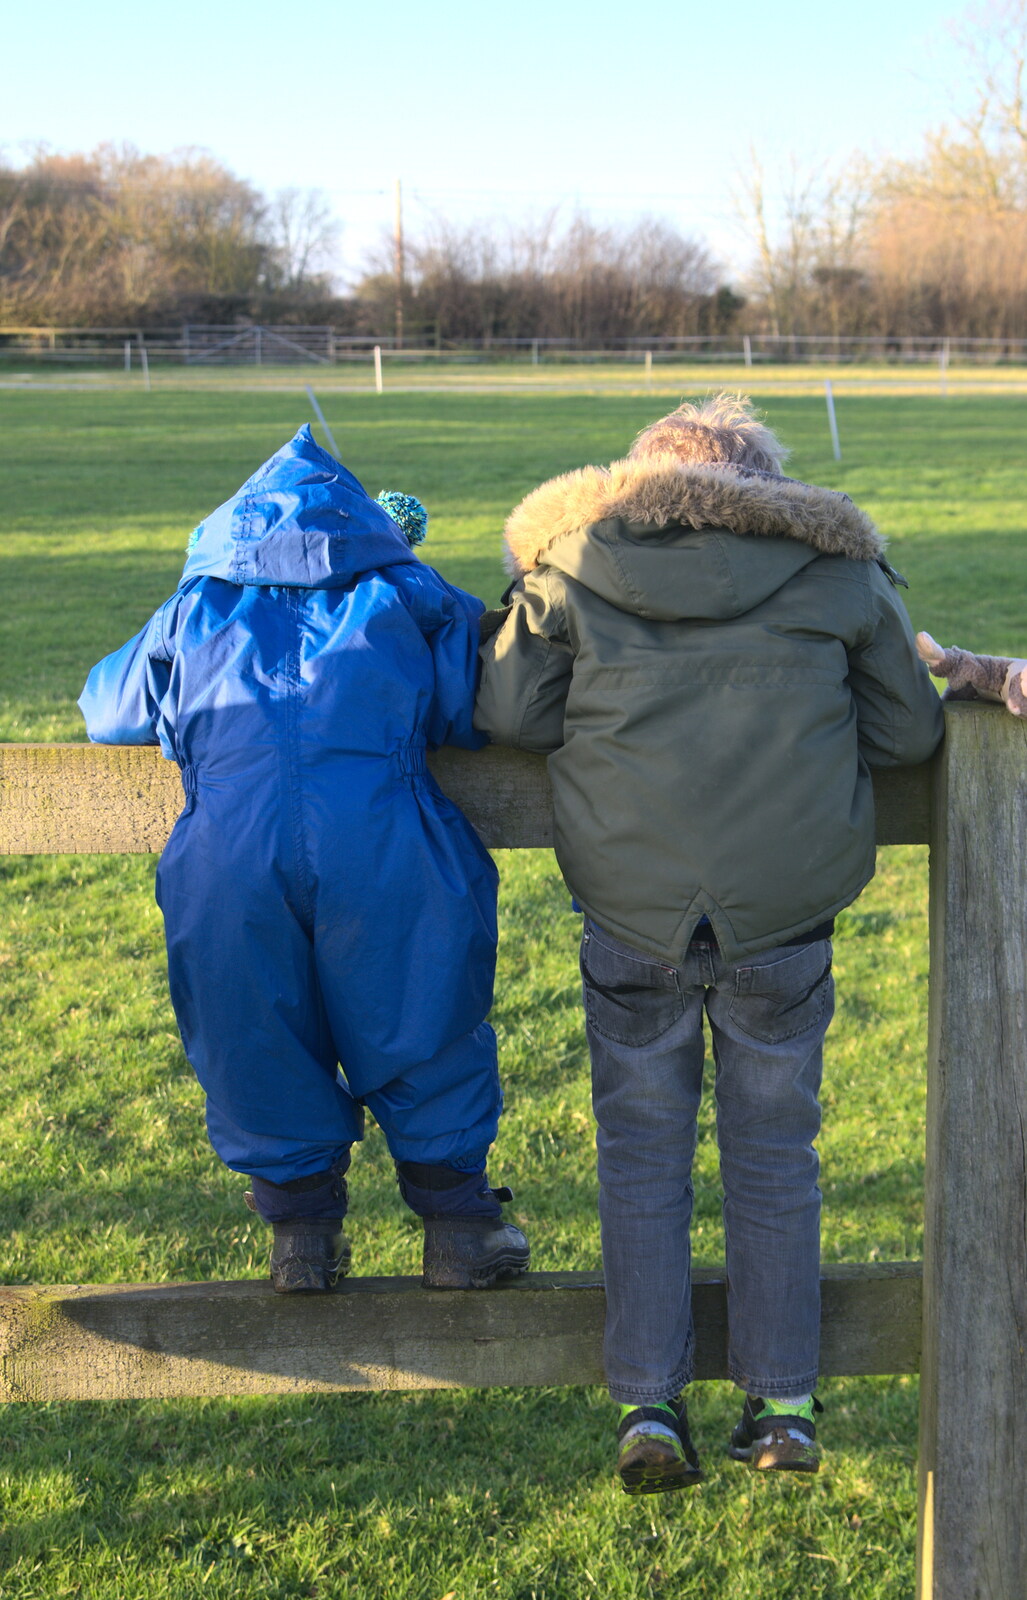 The boys lean over Chinner's fence from The BBs do a Recording, Hethel, Norfolk - 18th January 2015